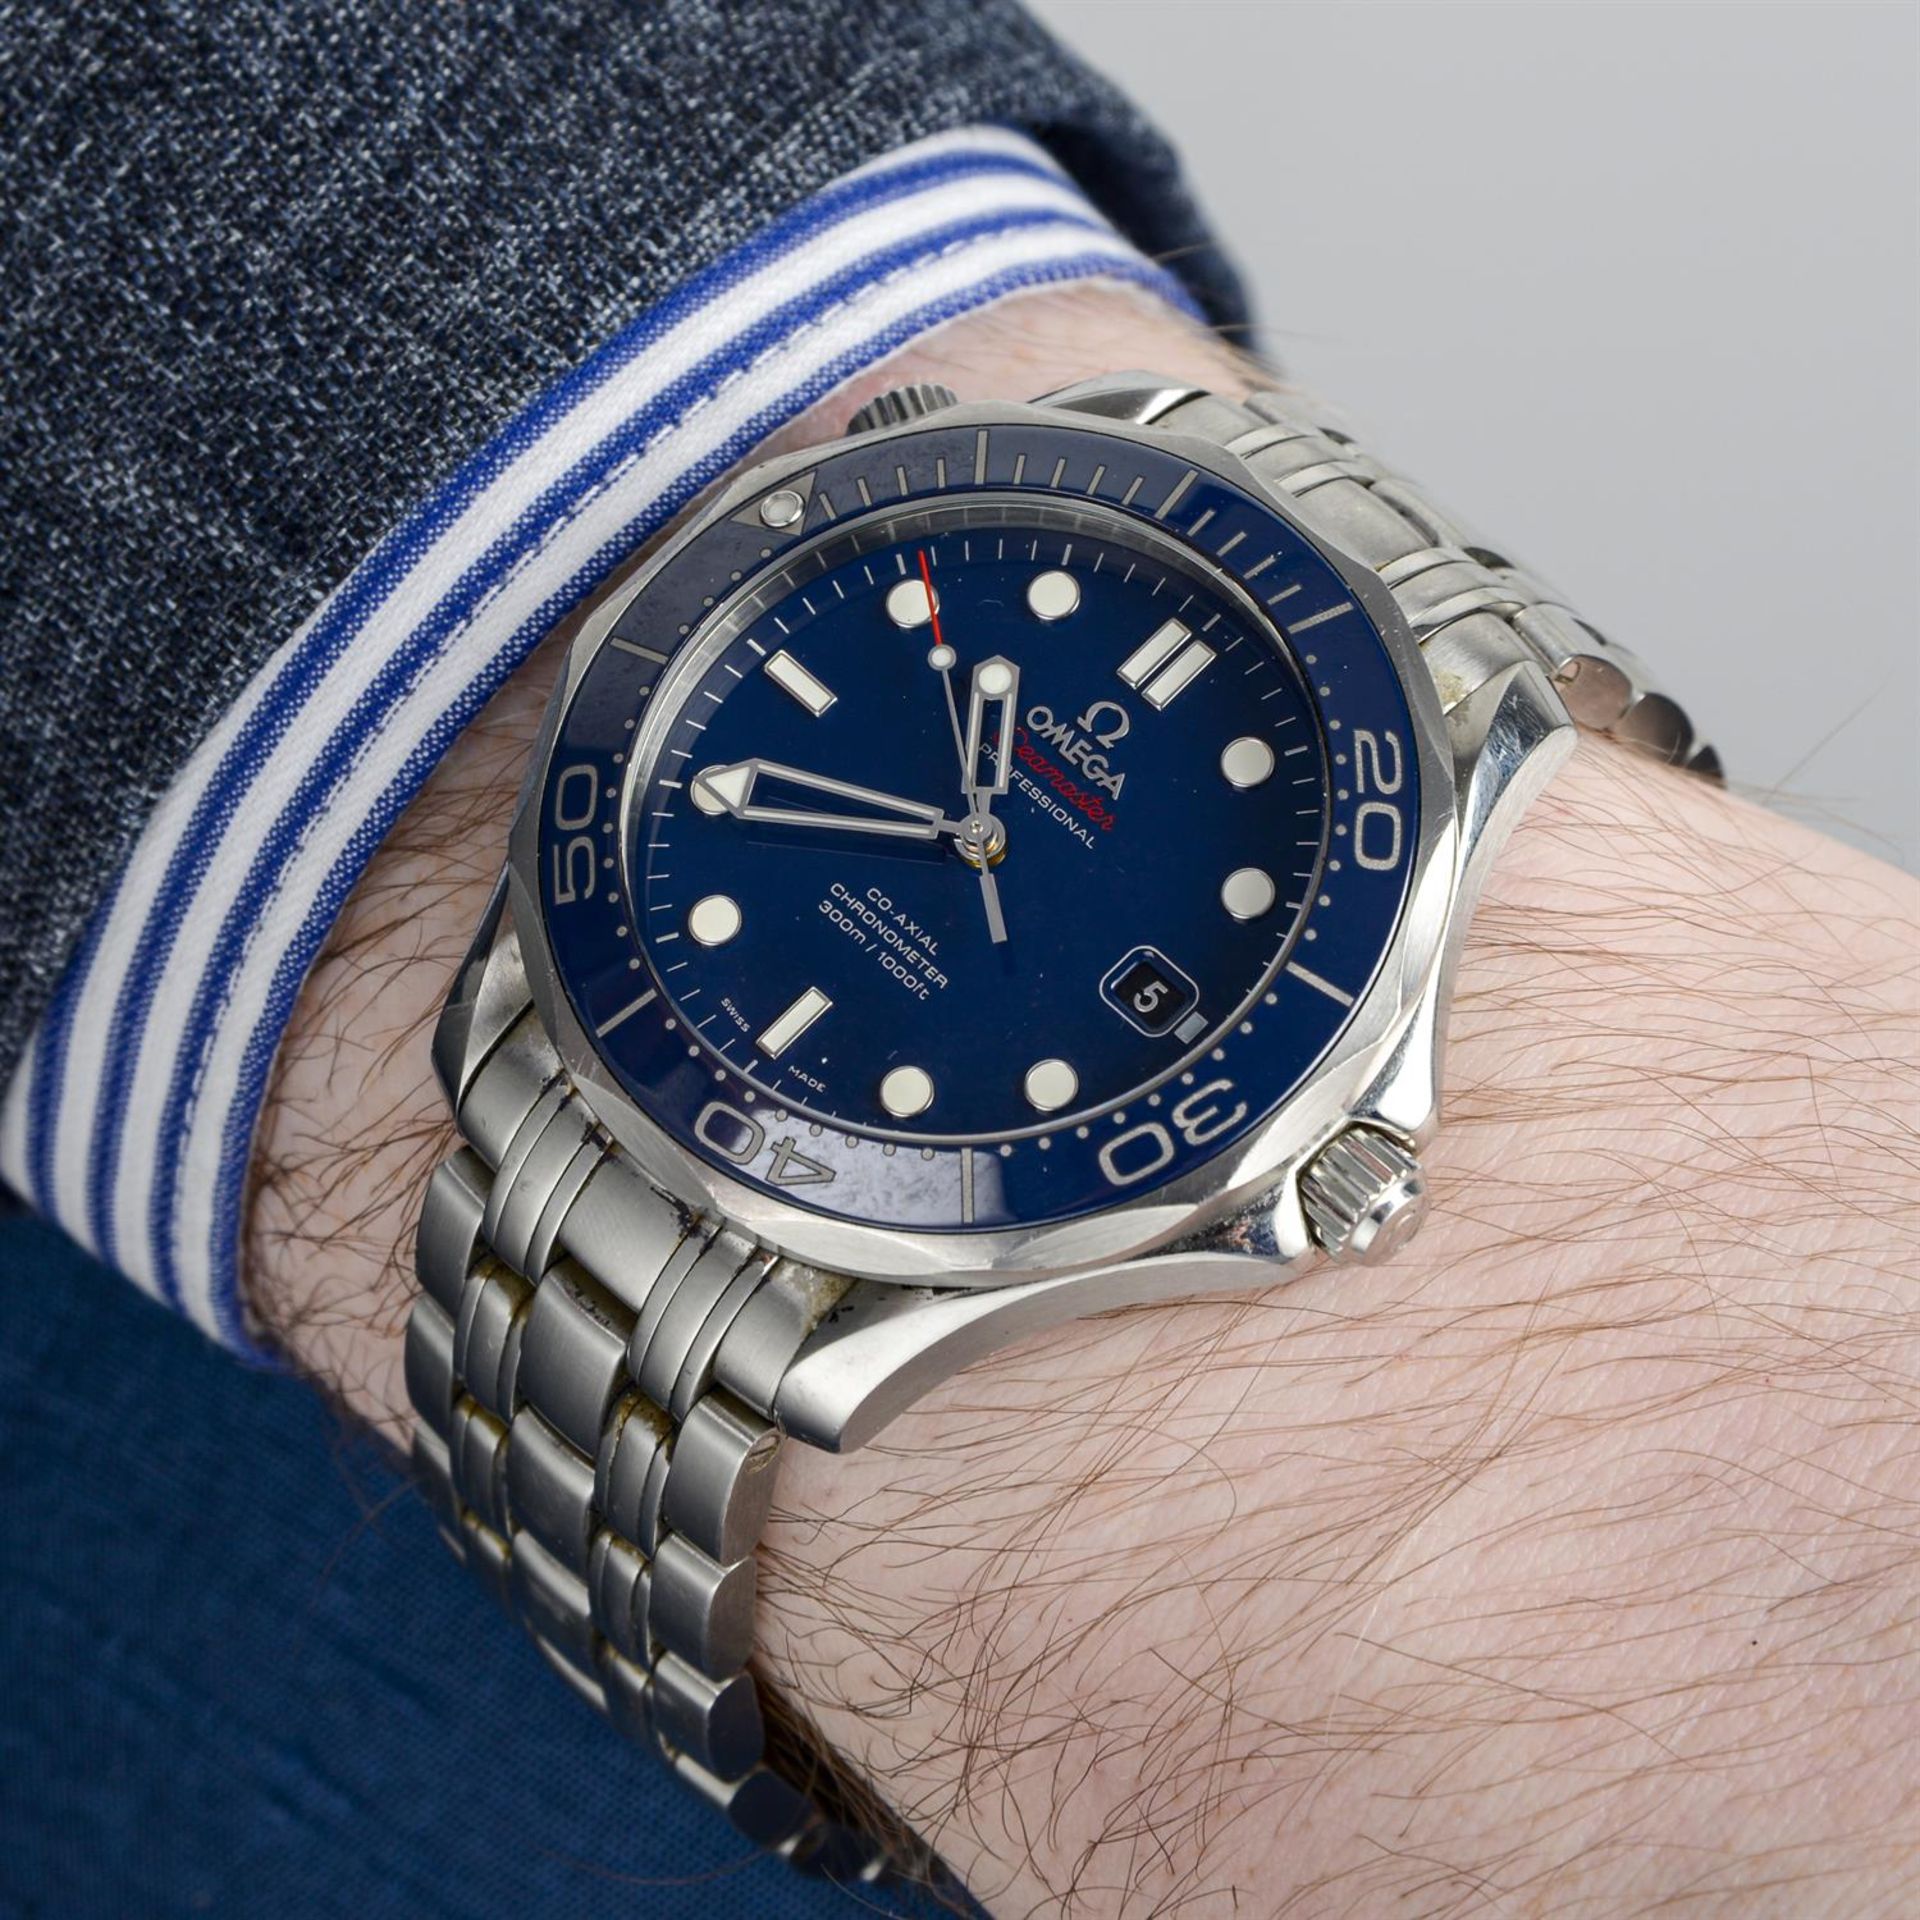 Omega - a Seamaster Co-Axial watch, 42mm. - Image 6 of 6